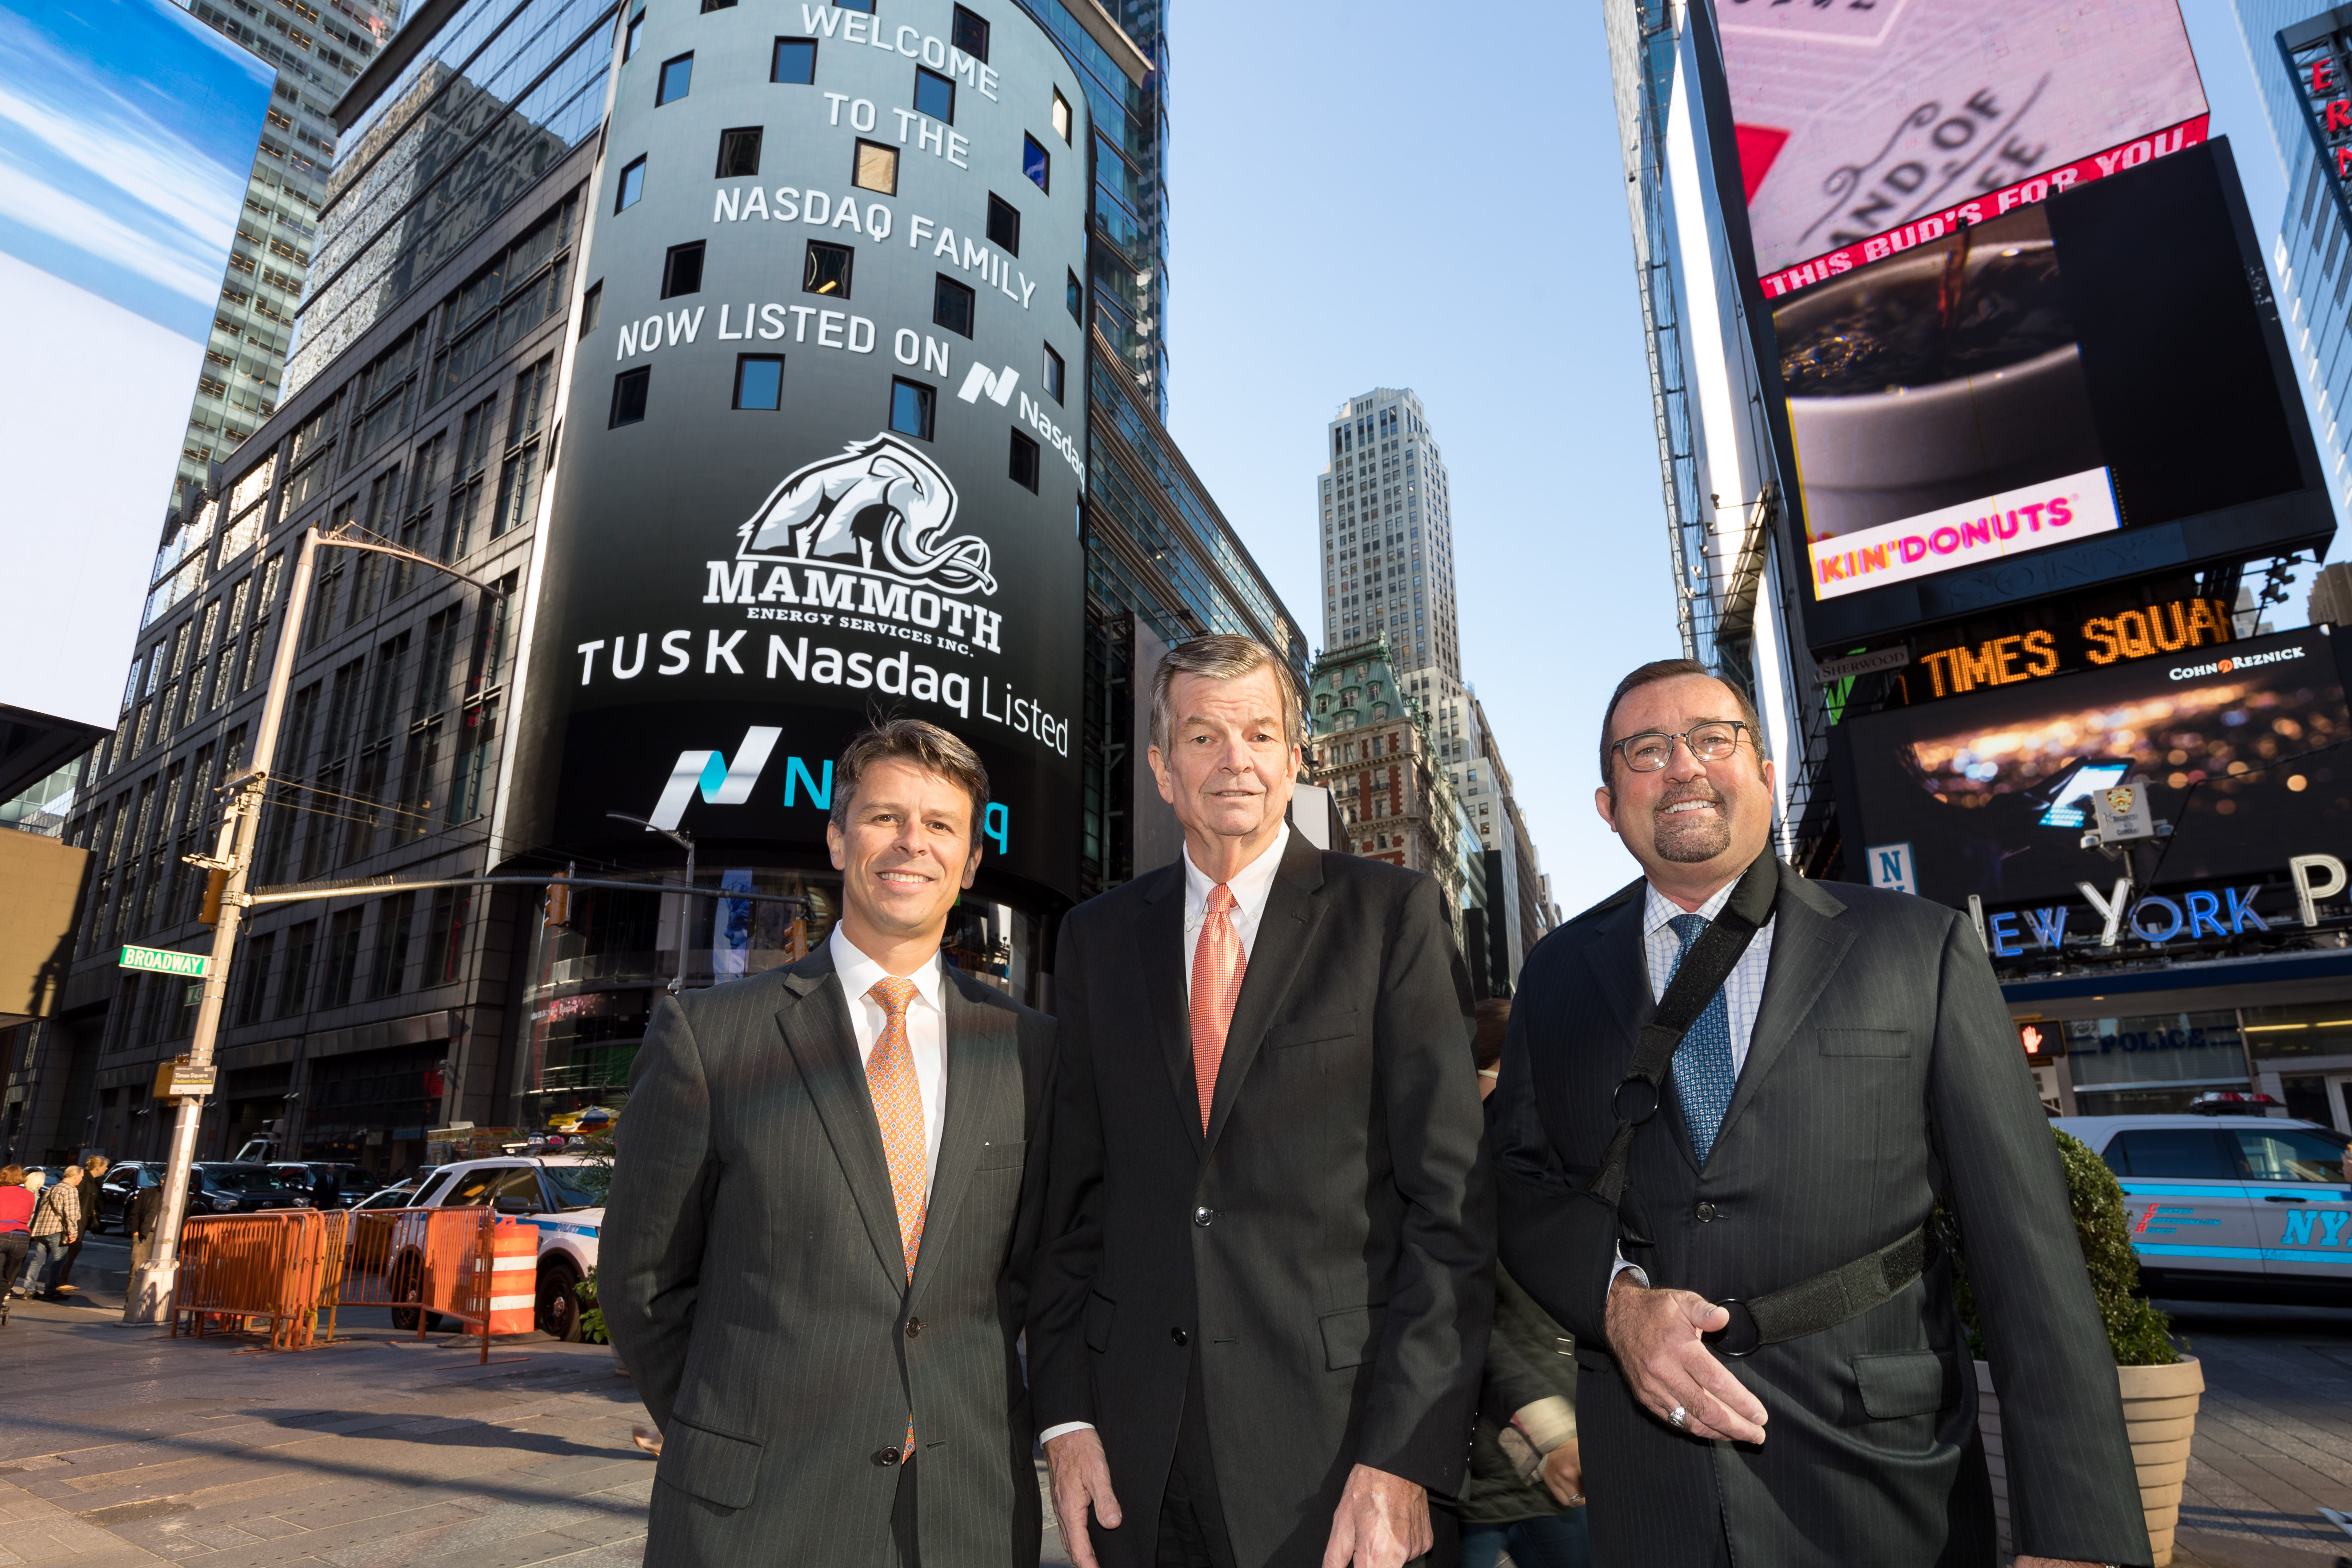 Mammoth Energy Services, Inc. (Nasdaq: TUSK) Rings The Nasdaq Stock Market Opening Bell in Celebration of its IPO